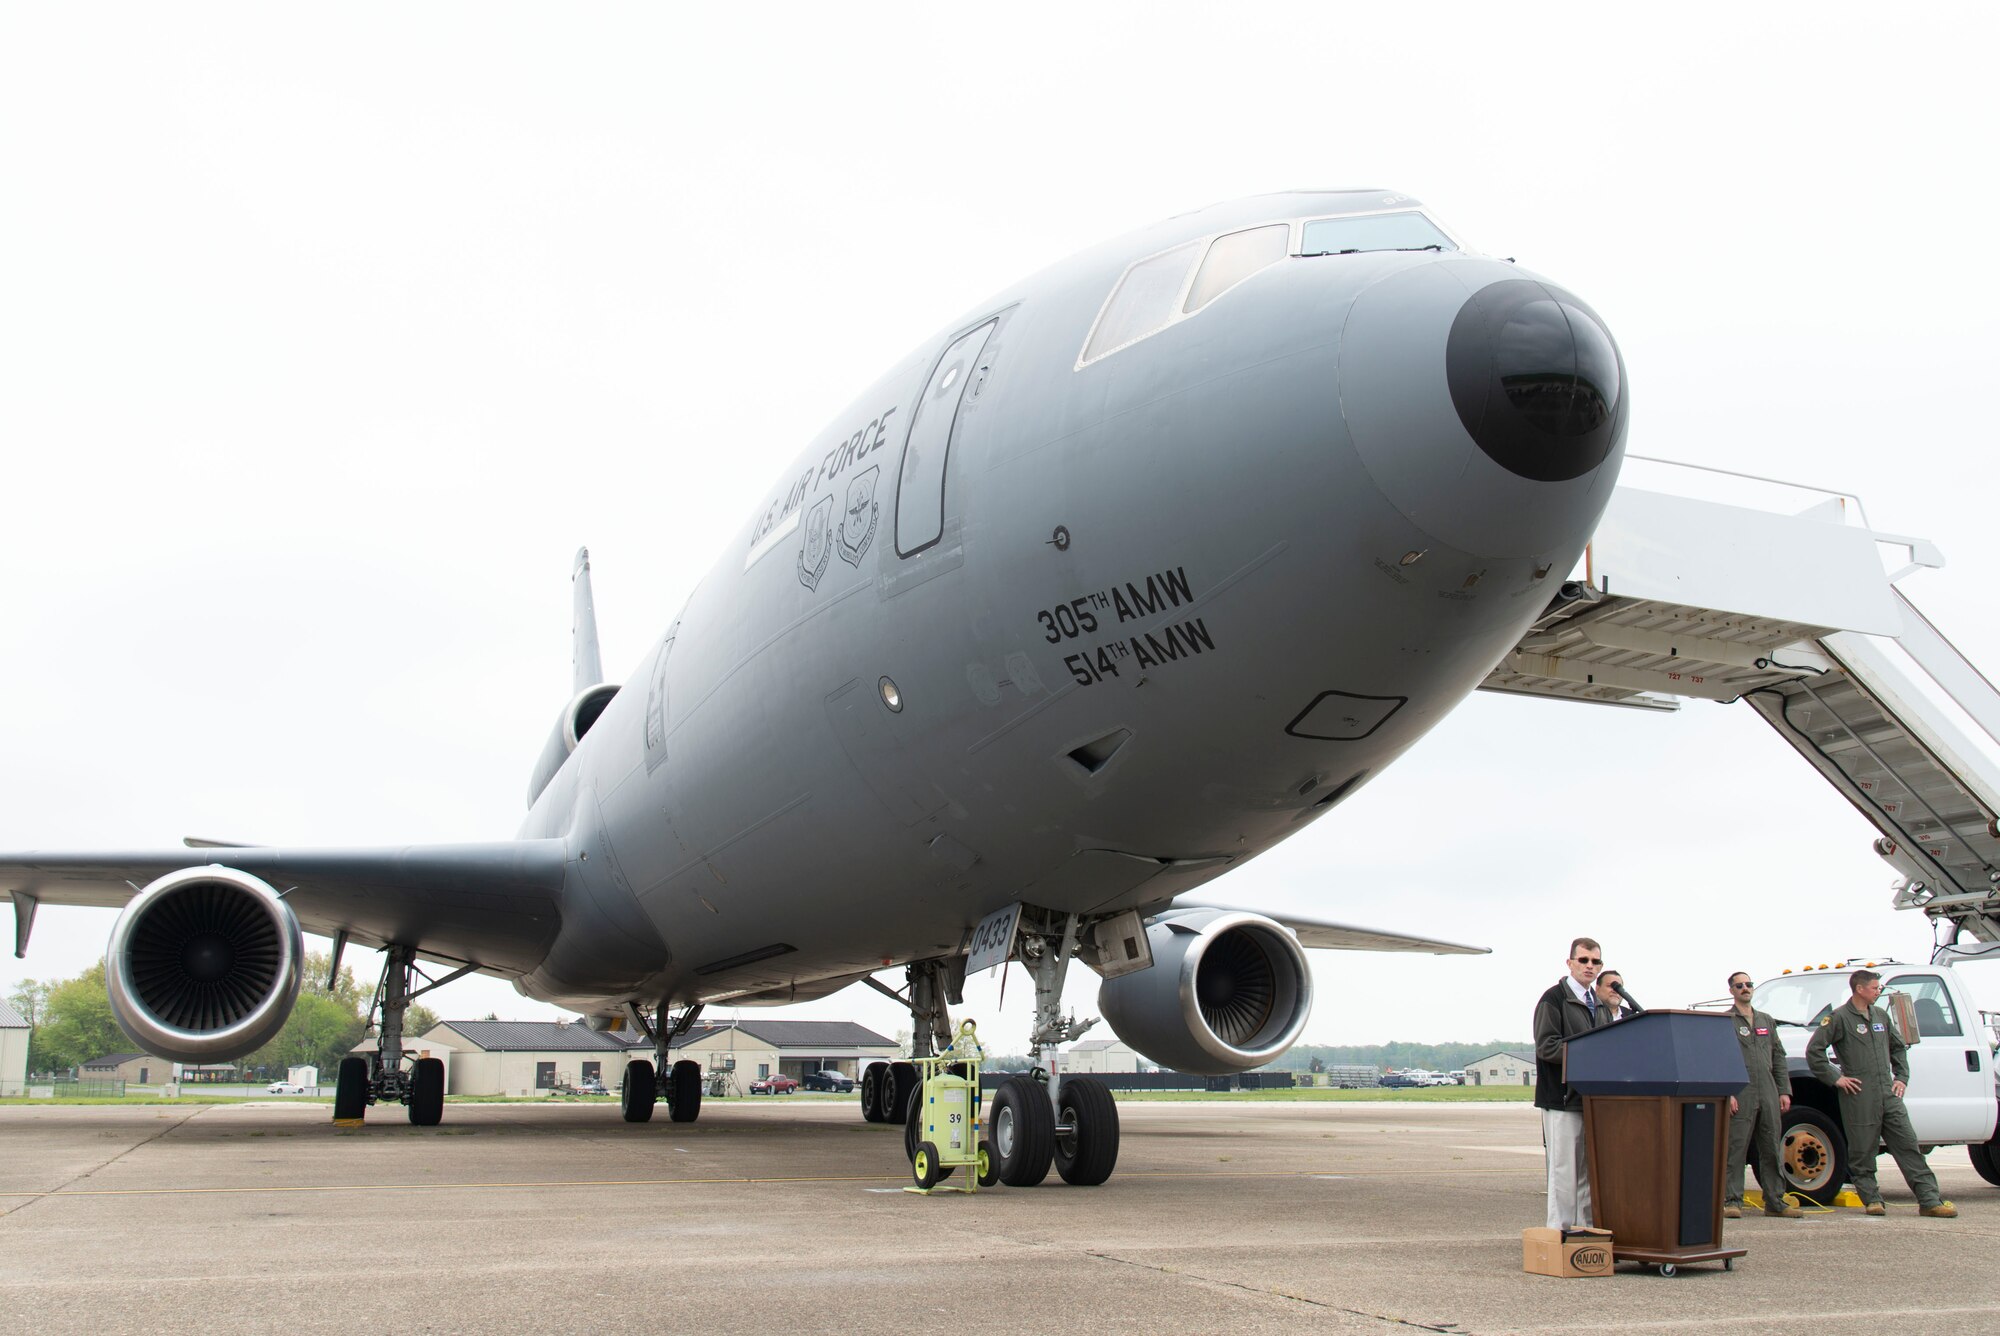 Stuart Lockhart, 305th Air Mobility Wing historian, speaks to attendees after the arrival of a KC-10A Extender at the Air Mobility Command Museum on Dover Air Force Base, Delaware, April 26, 2022. This particular aircraft was the first of 60 Extenders that entered the U.S. Air Force inventory. The aircraft was retired to Dover AFB from Joint Base McGuire-Dix-Lakehurst, New Jersey, to become the 36th addition to the AMC Museum. (U.S. Air Force photo by Roland Balik)